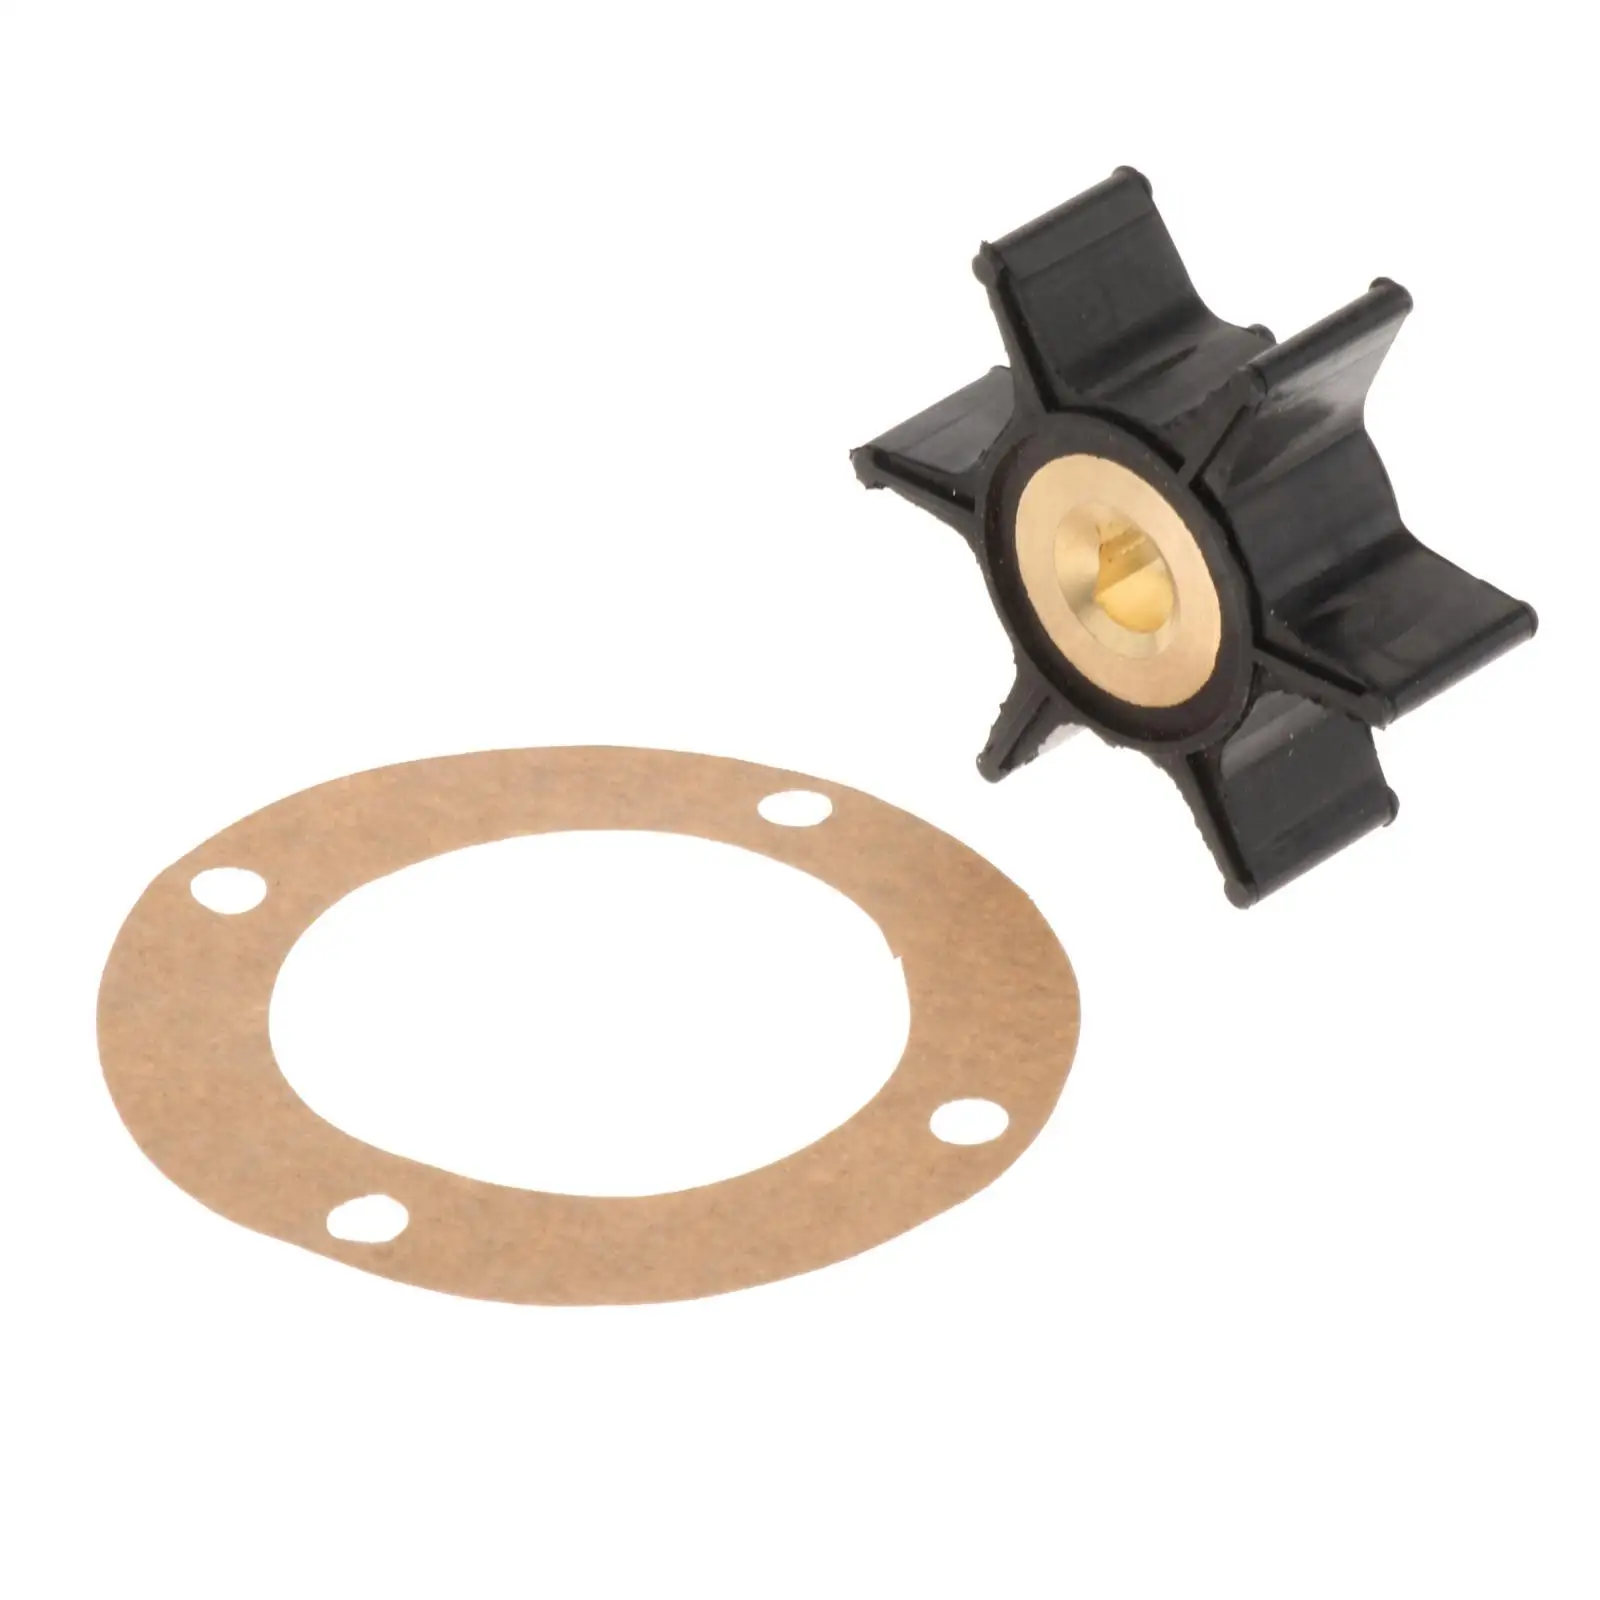 2 Pieces Impeller and 4-Hole Gasket Kit Parts Impeller Kit Replacement Fit for Onan 131-0386 170-3172 Mcck 4.0 kW Water Pump